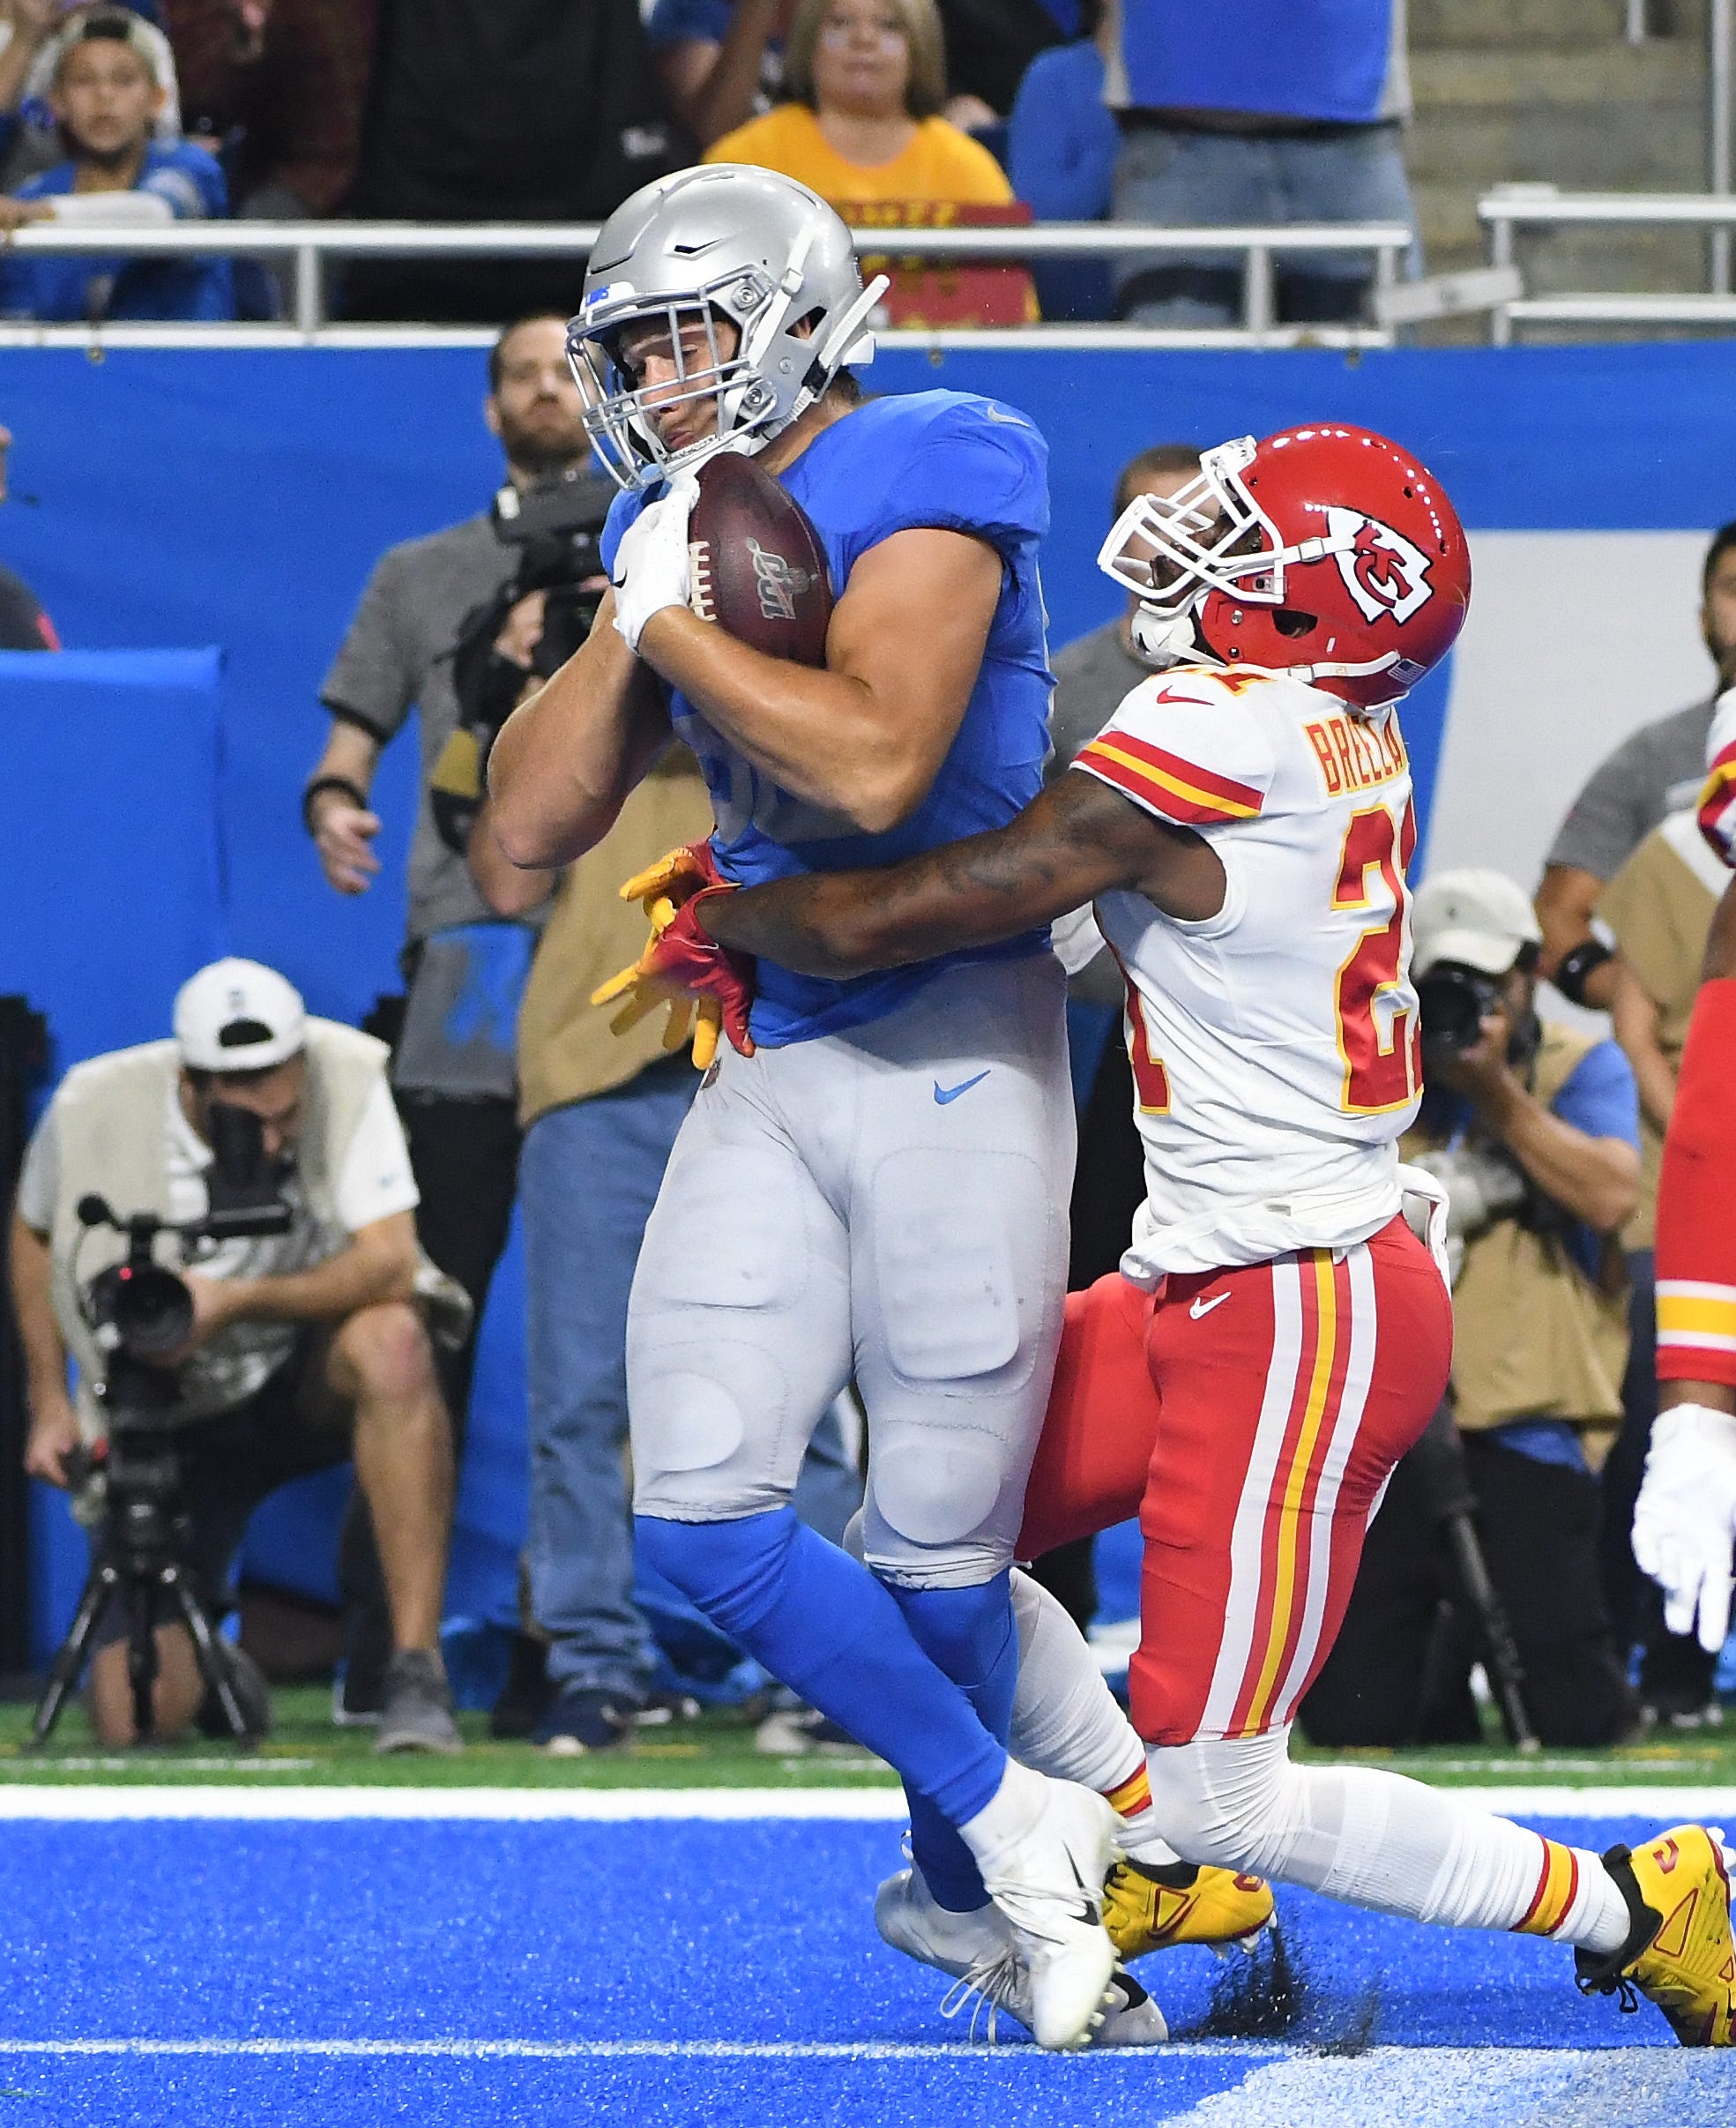 Lions' T.J. Hockenson brings in a touchdown reception in front of Chiefs' Bashaud Breeland in the first quarter.